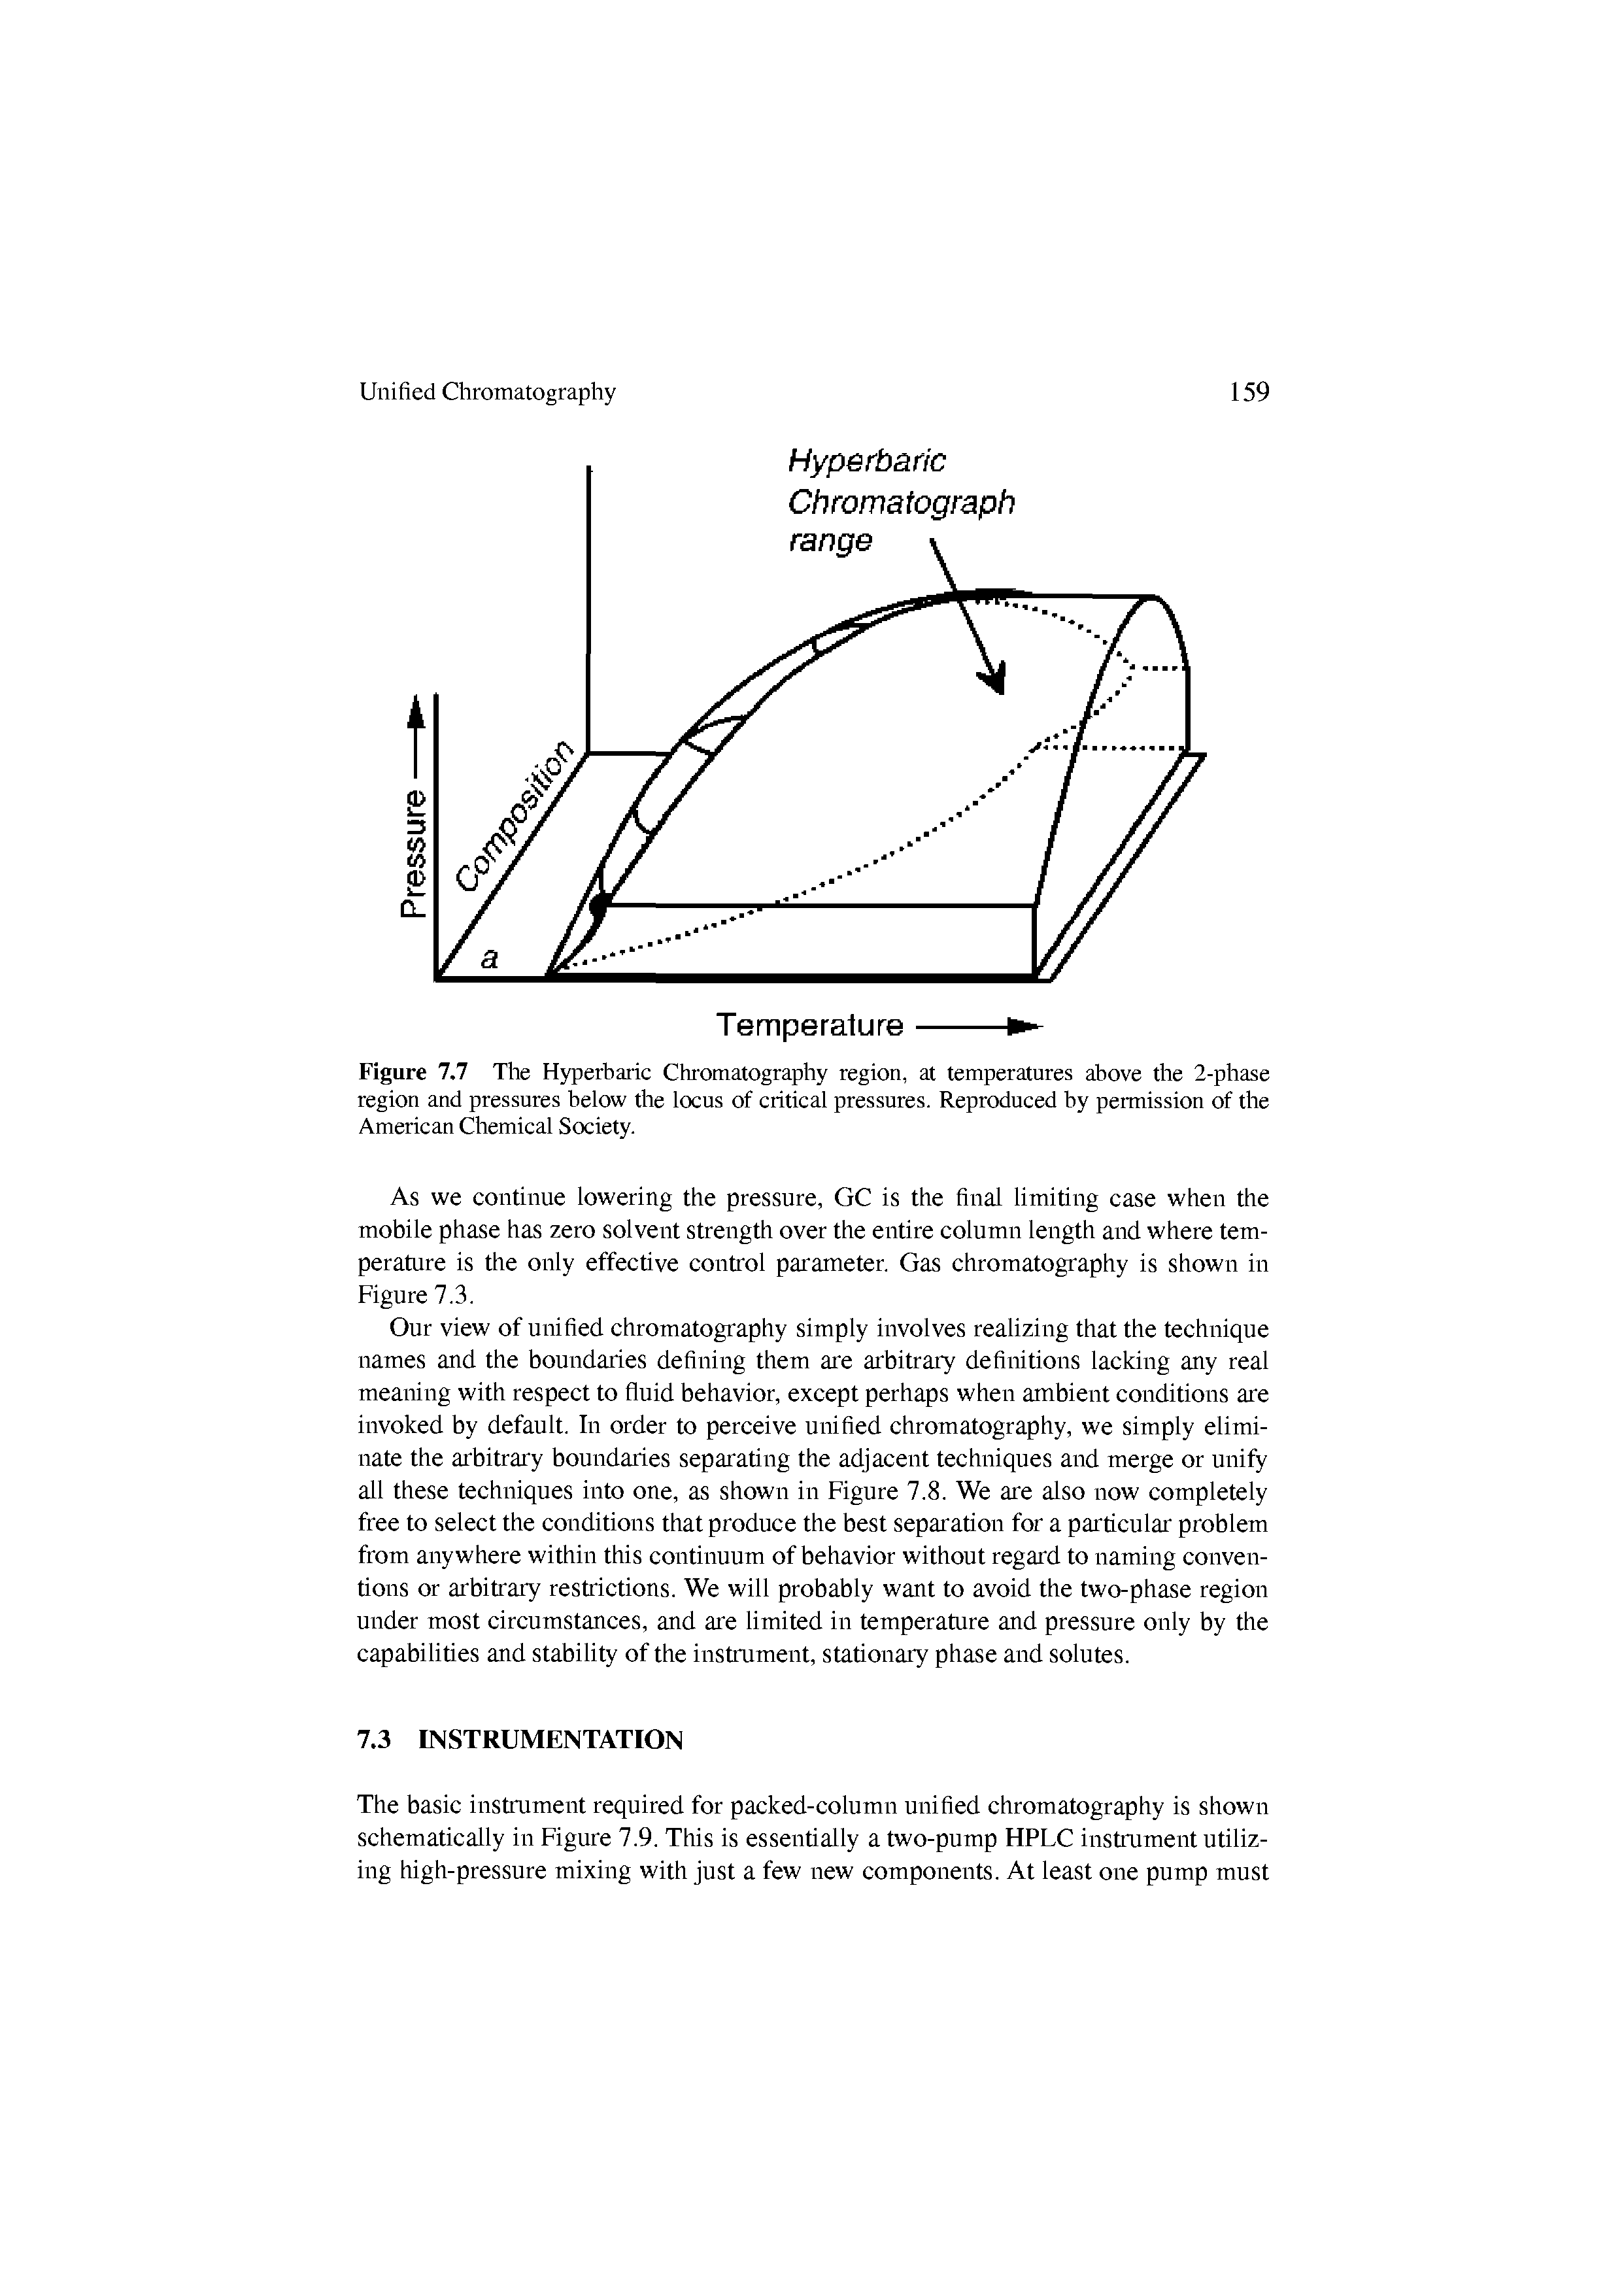 Figure 7.7 The Hyperbaric Chromatography region, at temperatures above the 2-phase region and pressures below the locus of critical pressures. Reproduced by permission of the American Chemical Society.